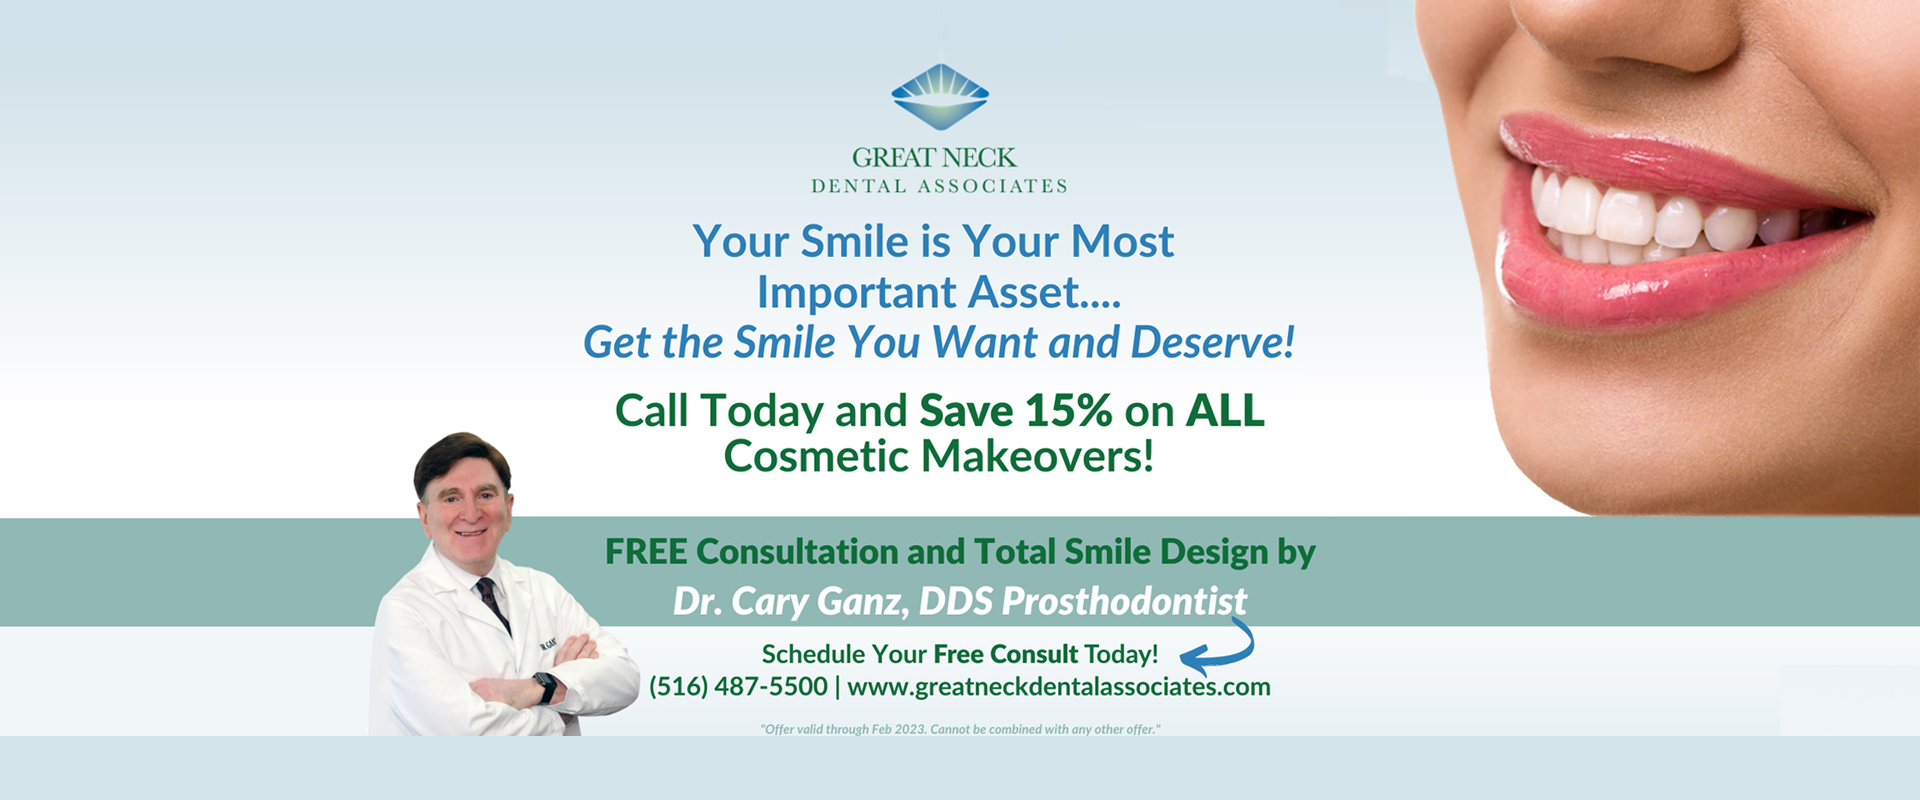 Call Today and Save 15% on ALL Cosmetic Makeovers!